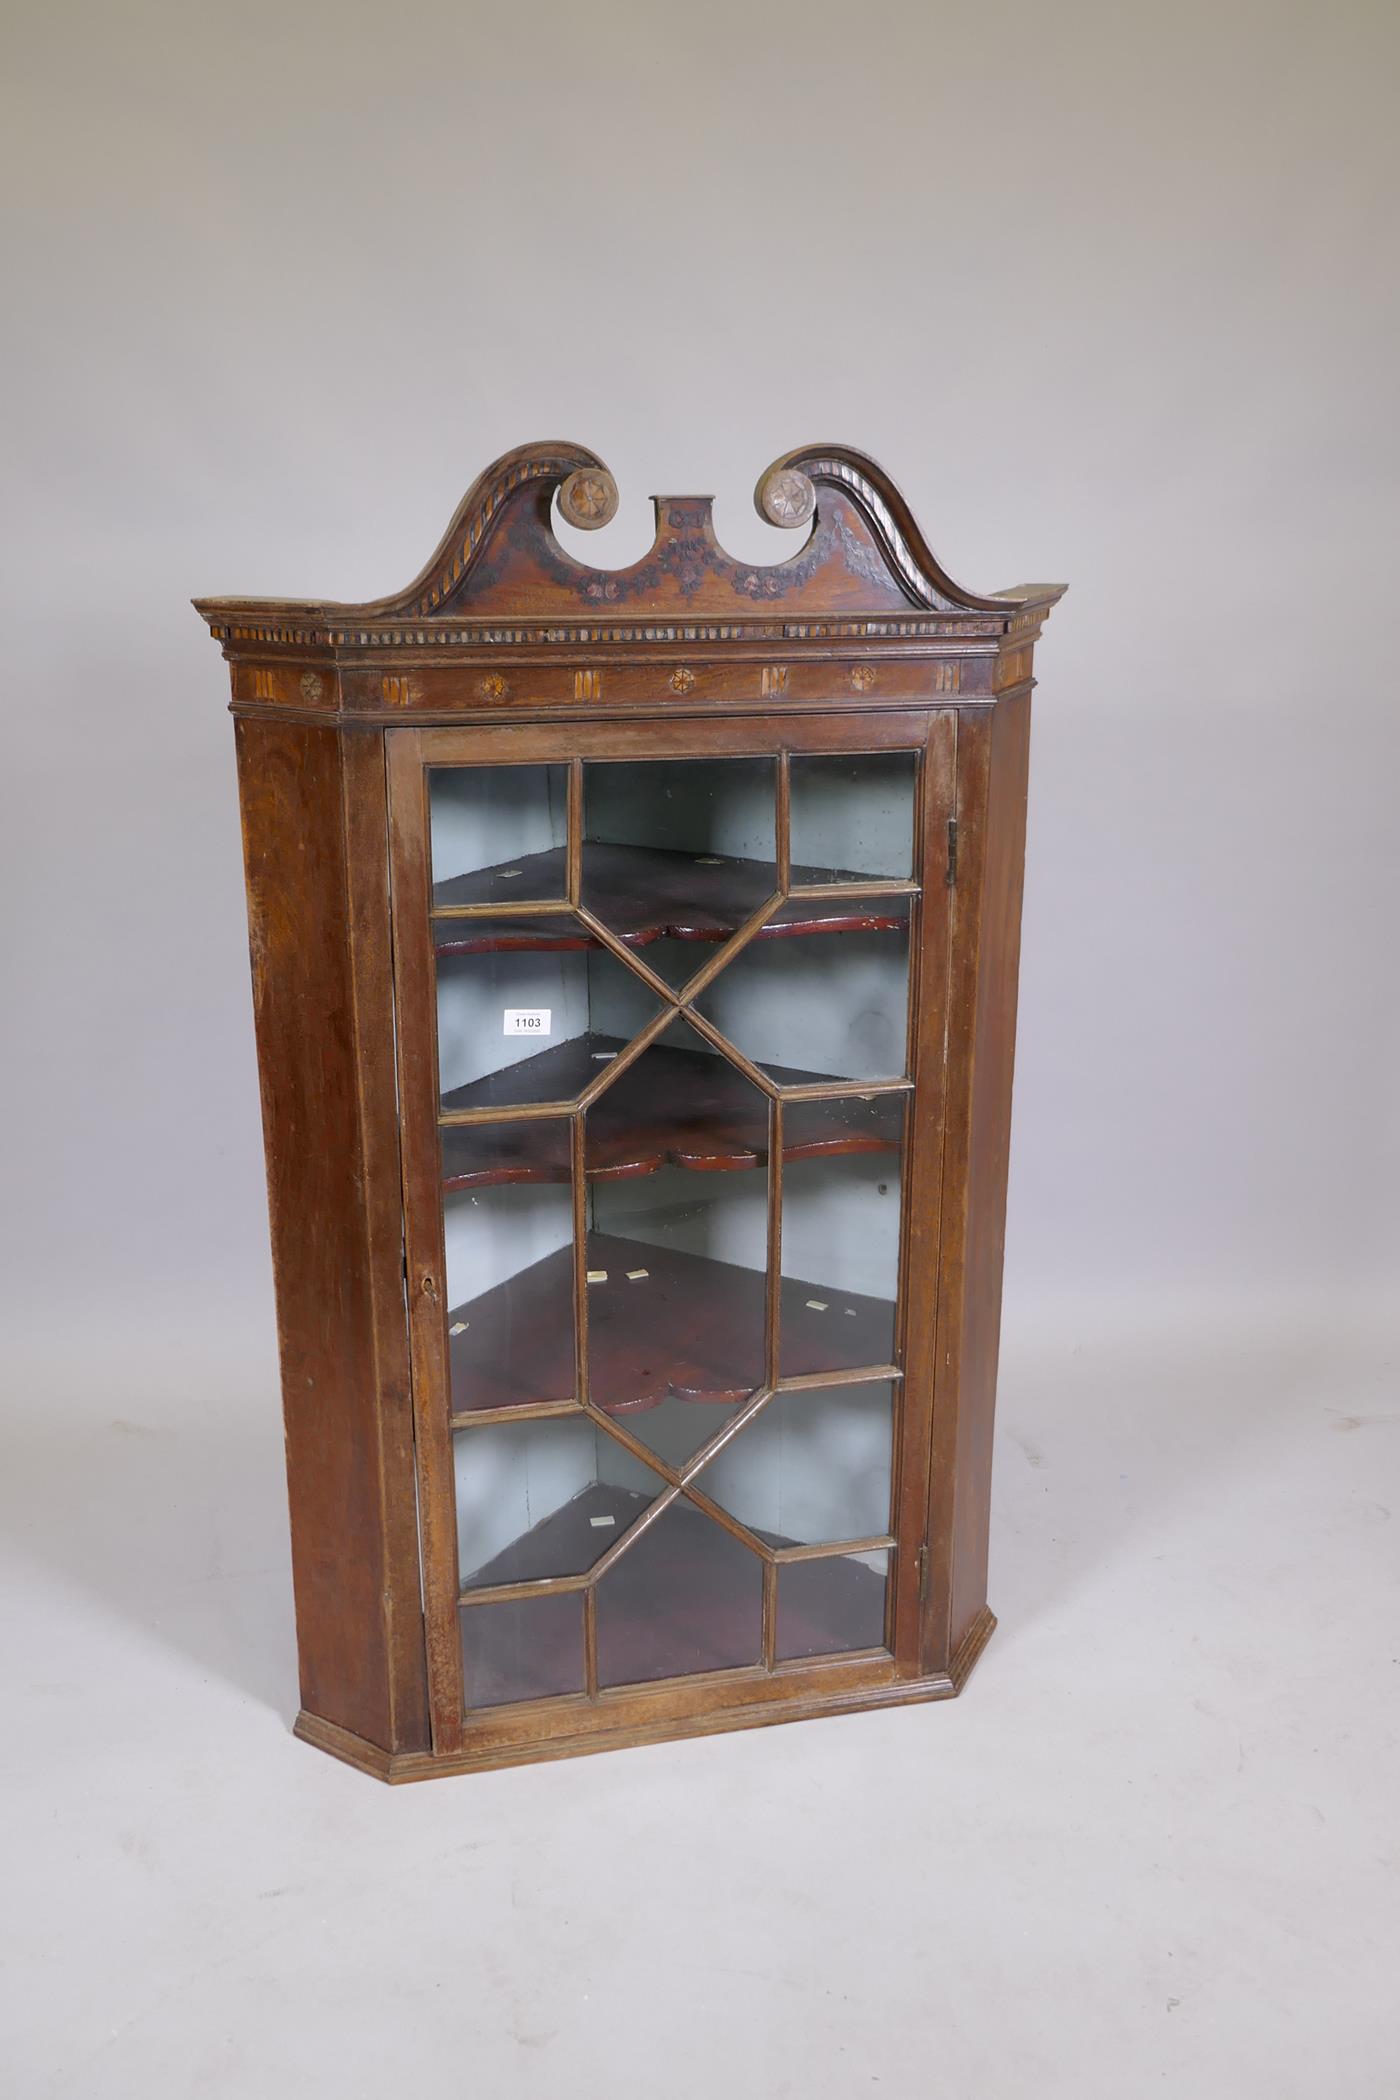 A C19th mahogany hanging corner cupboard with an astragal glazed door, with painted and inlaid - Image 2 of 3